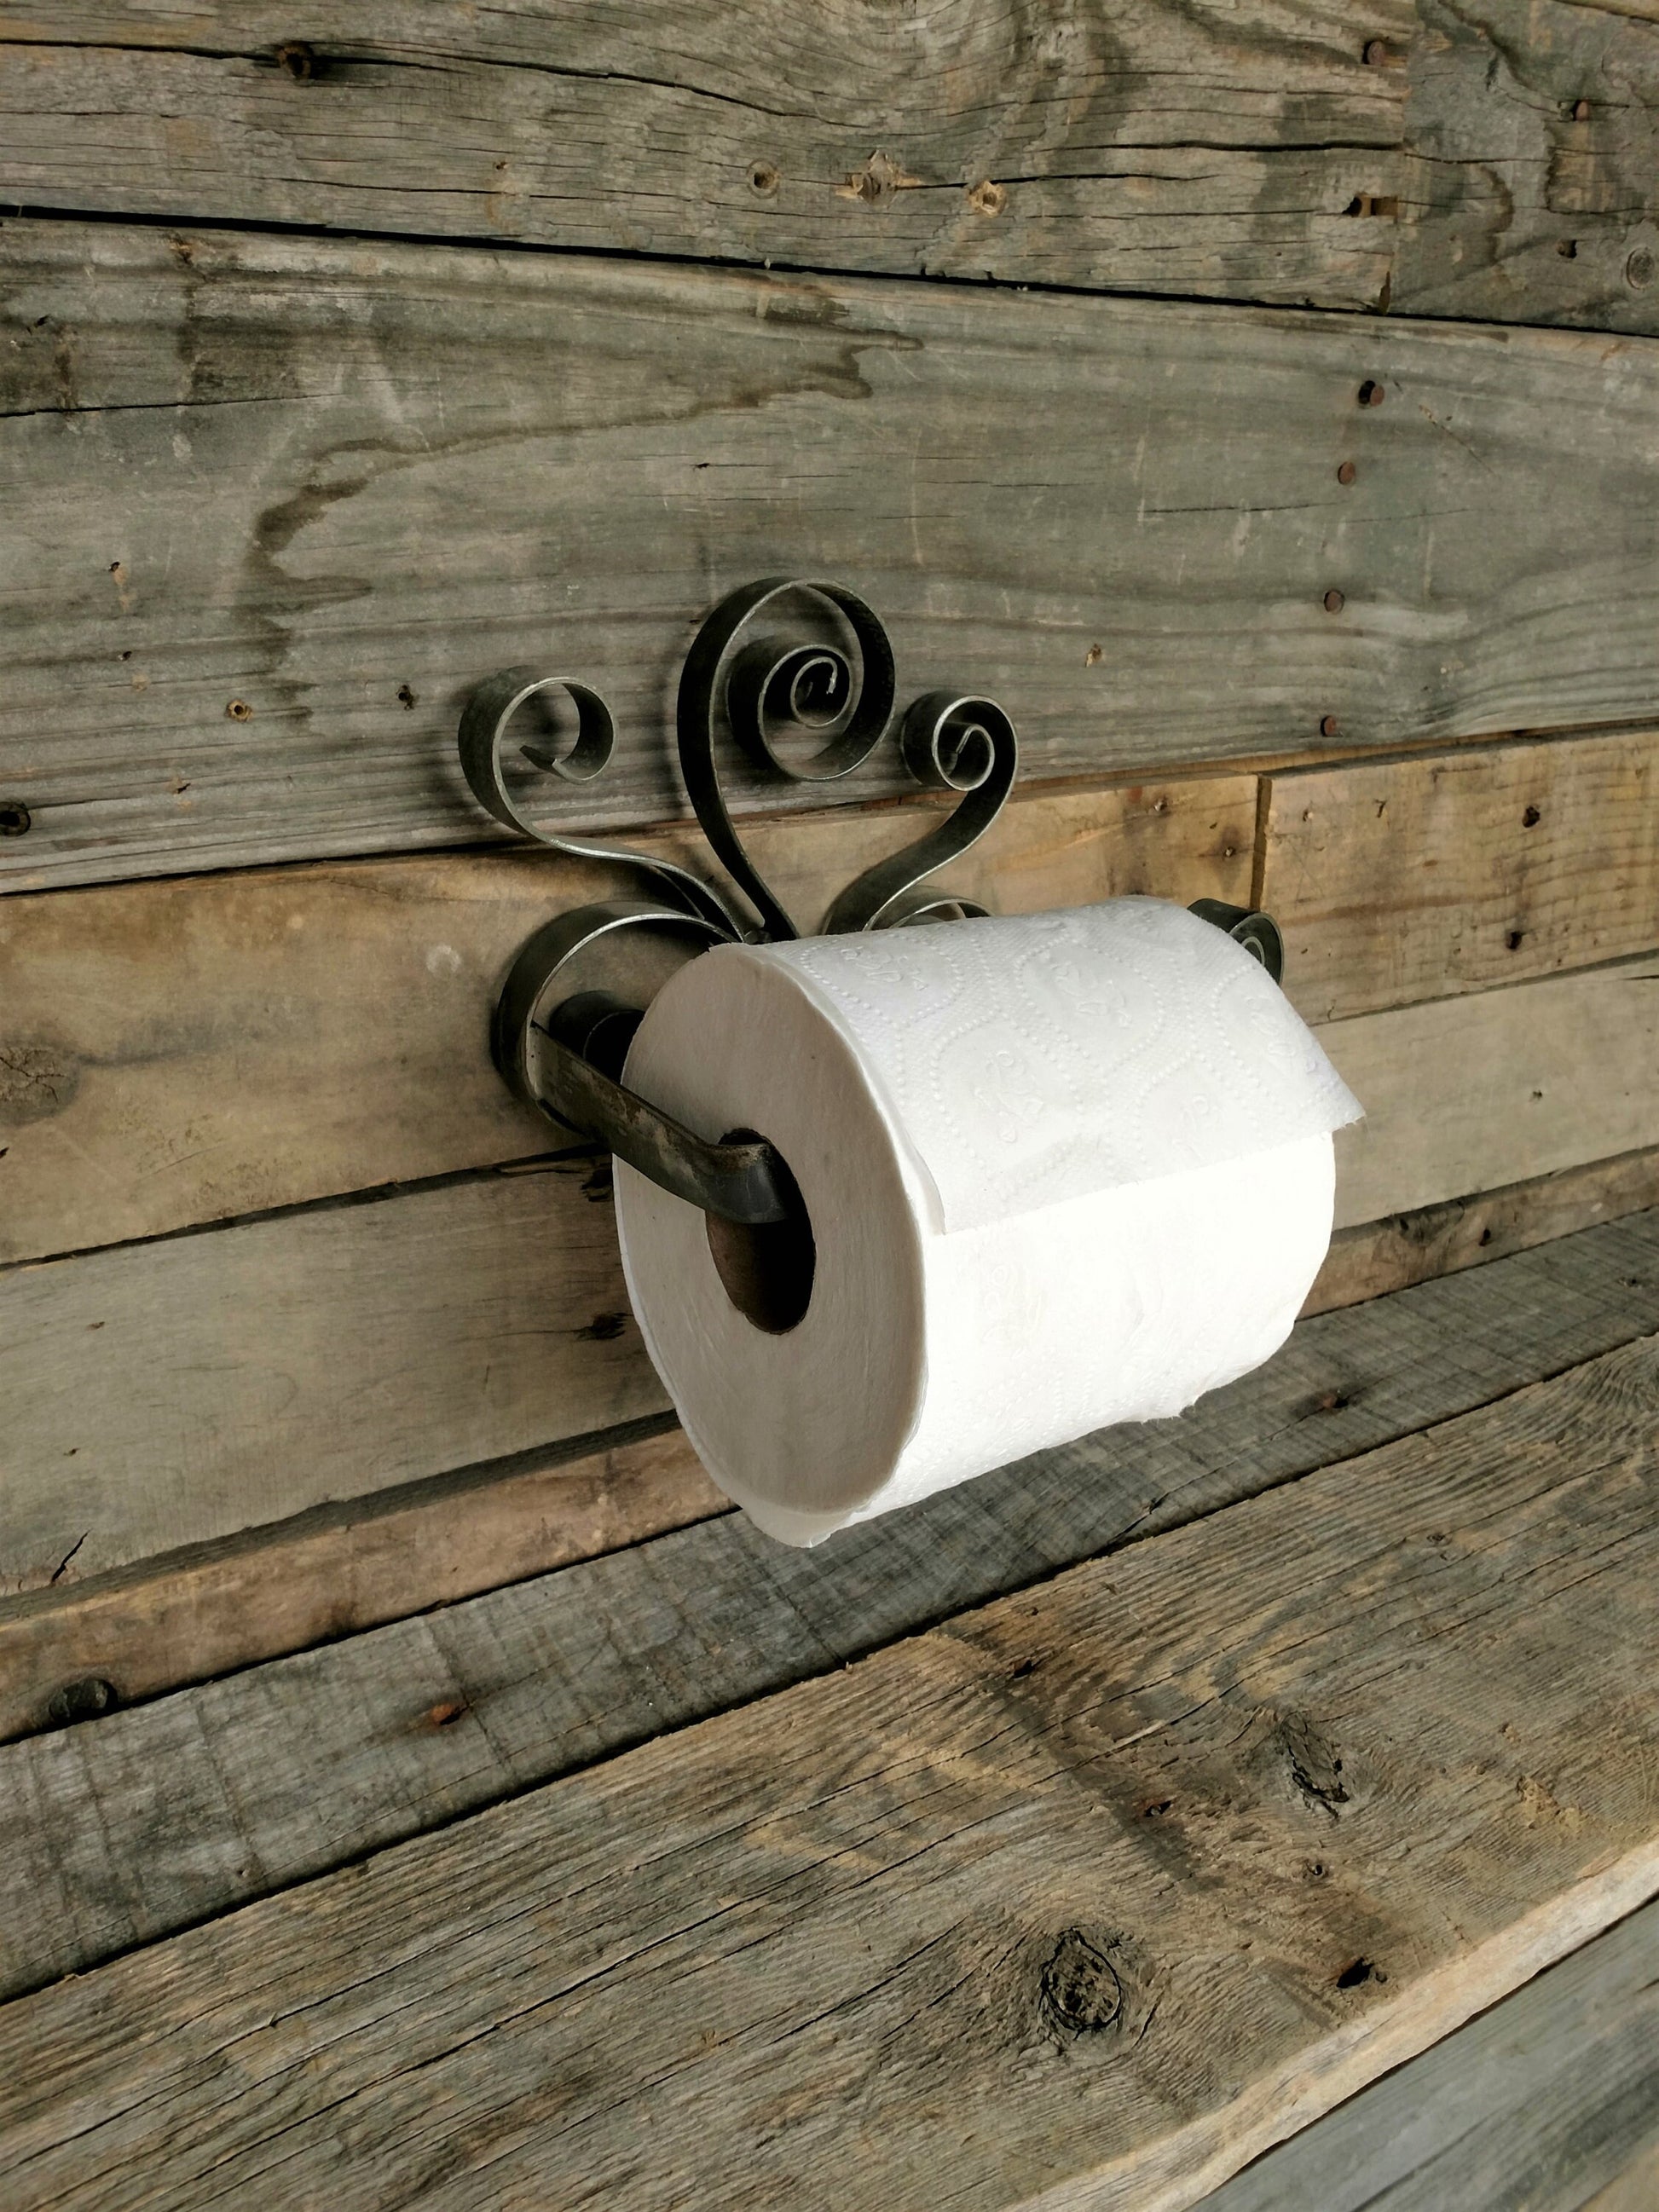 Wine Barrel Ring Toilet Paper Holder - Contorto - Made from retired CA wine barrel rings. 100% Recycled